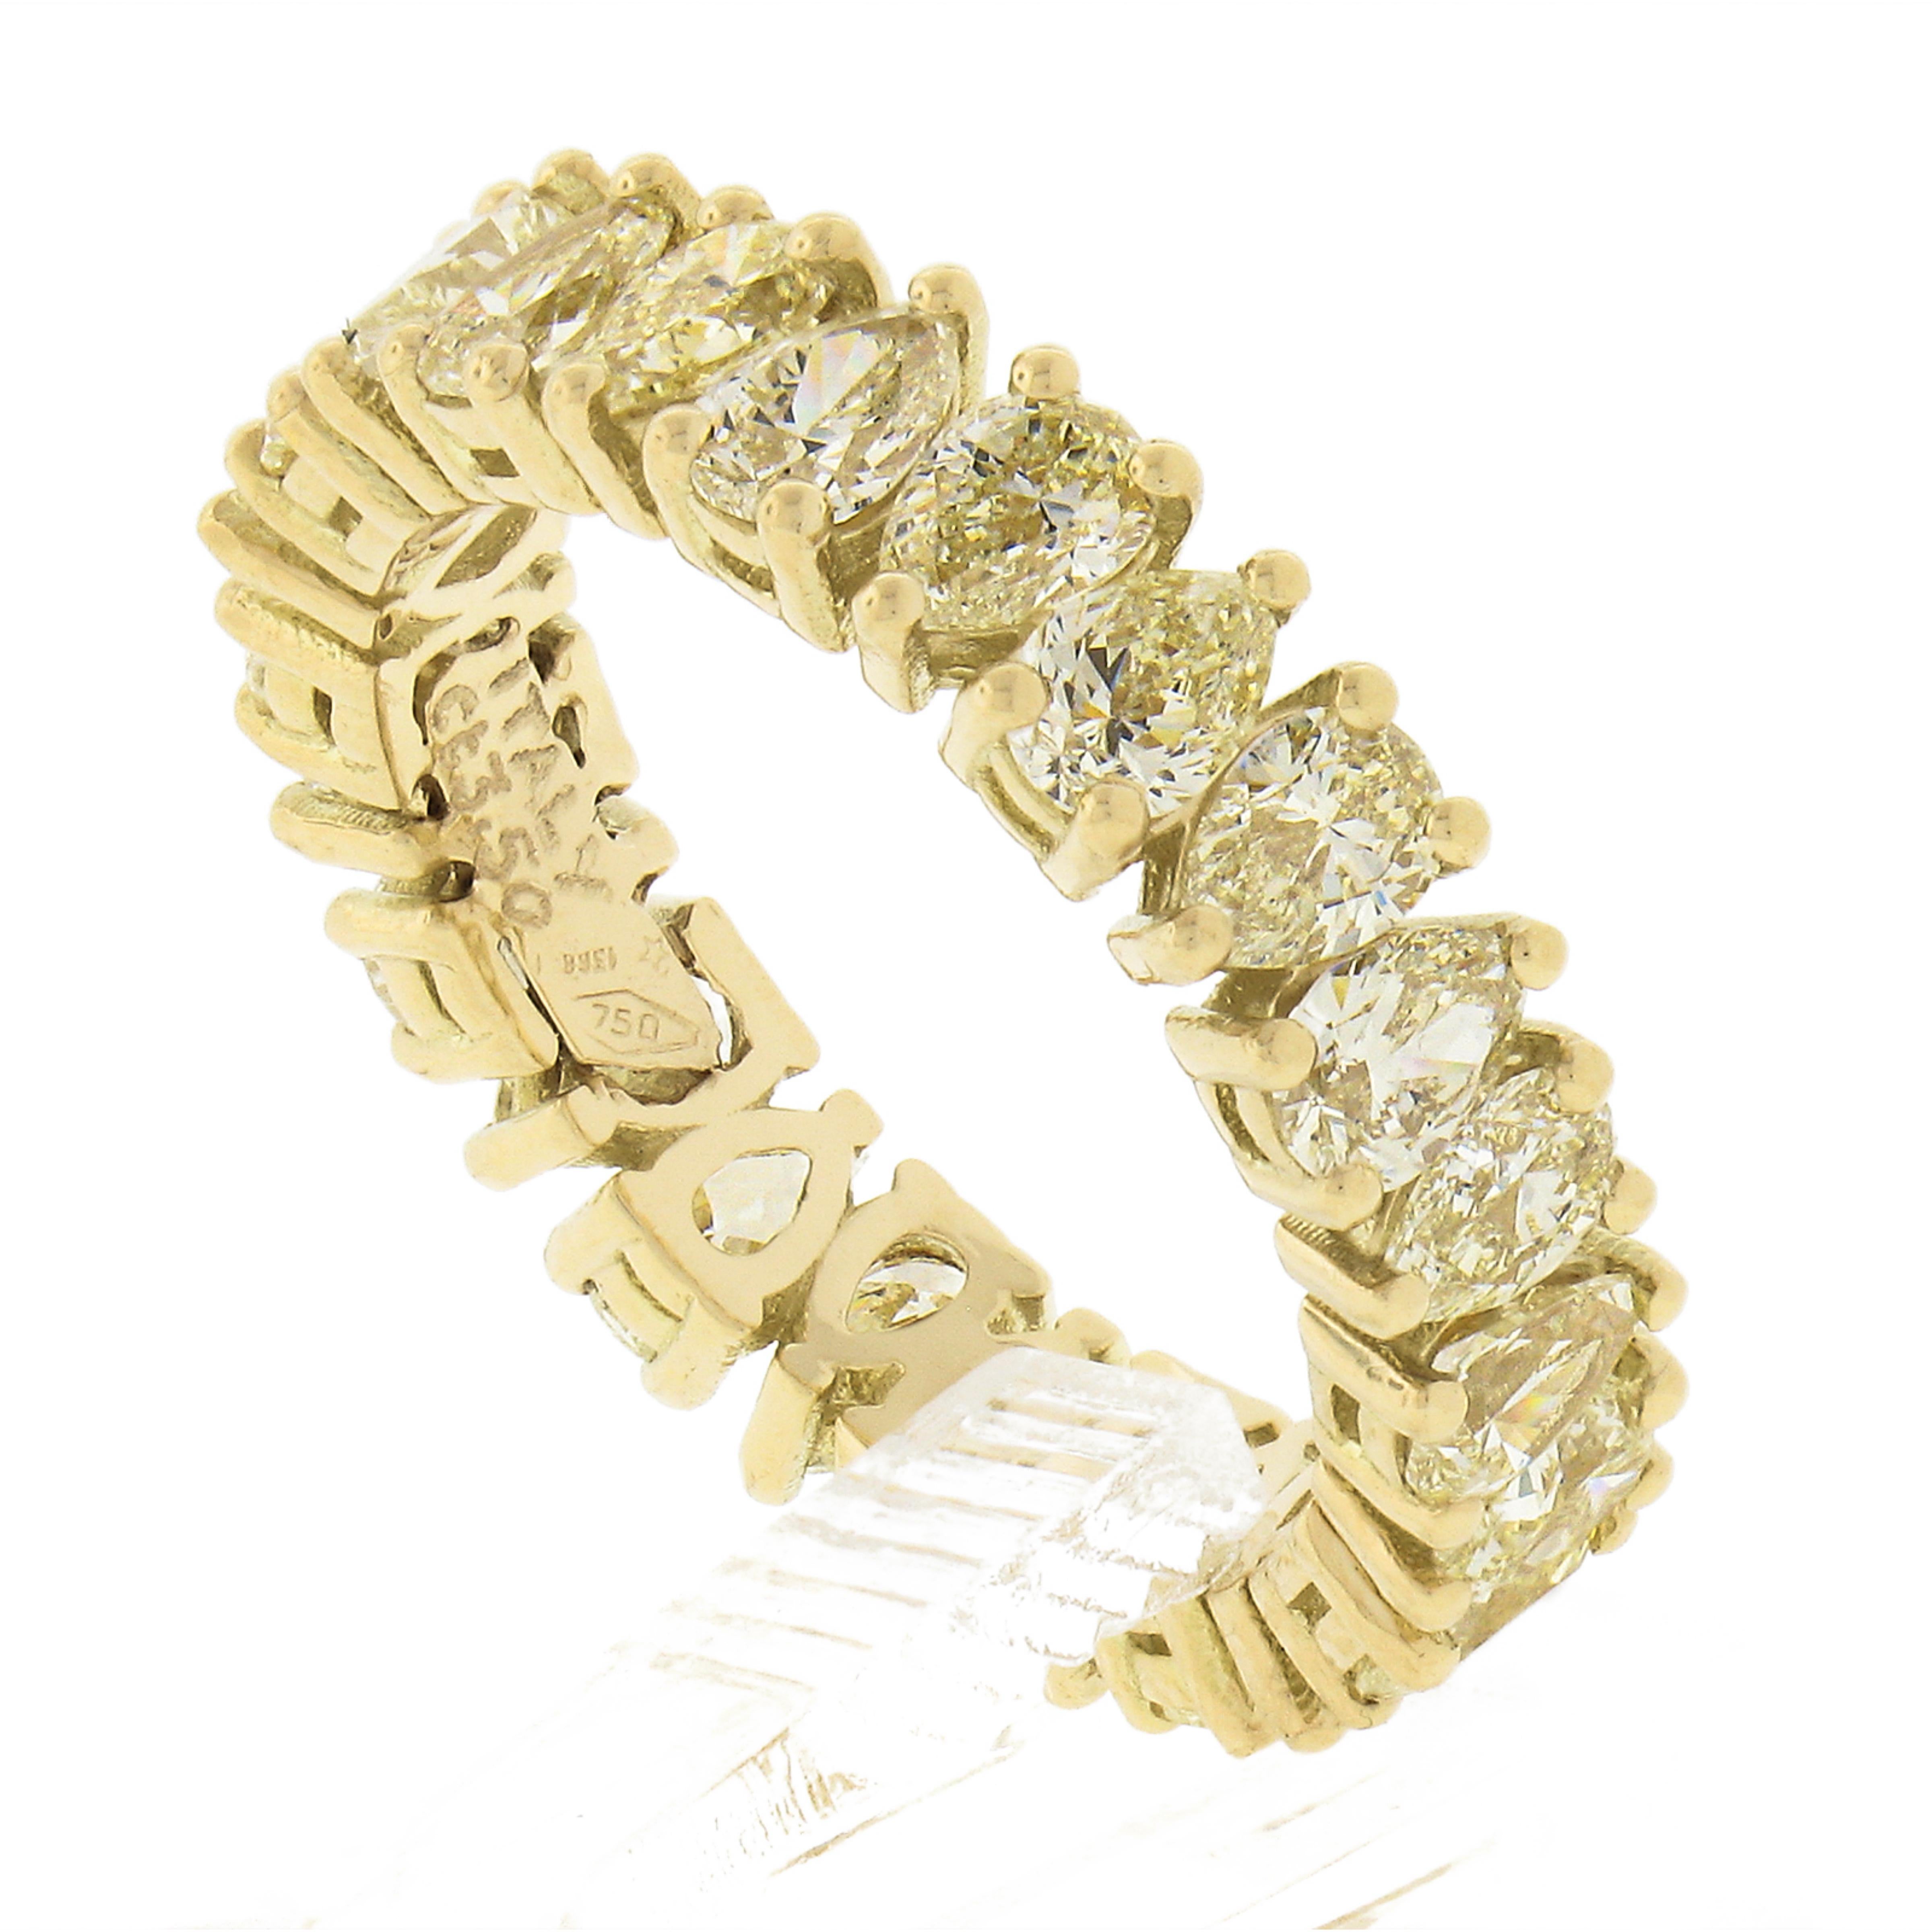 This breathtaking new eternity band ring is crafted in solid 18k yellow gold and features 24 stunning fancy light to fancy yellow color diamond stones which are neatly prong set entirely throughout. The pear brilliant cut diamonds total 3.50 carats